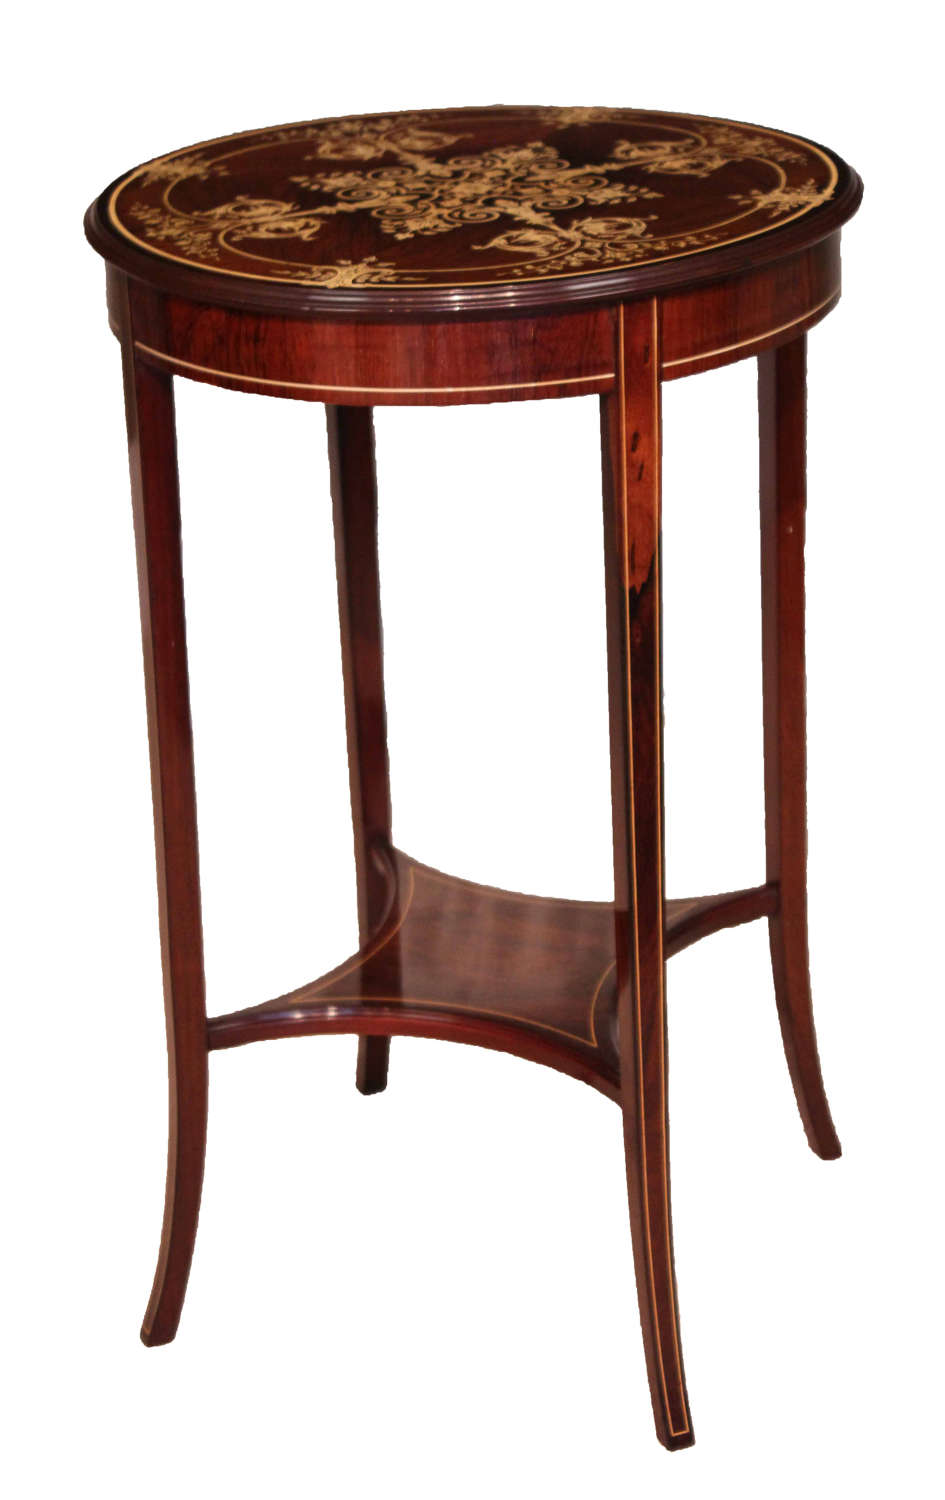 An Edwardian Quality Late Victorian Rosewood Inlaid Table